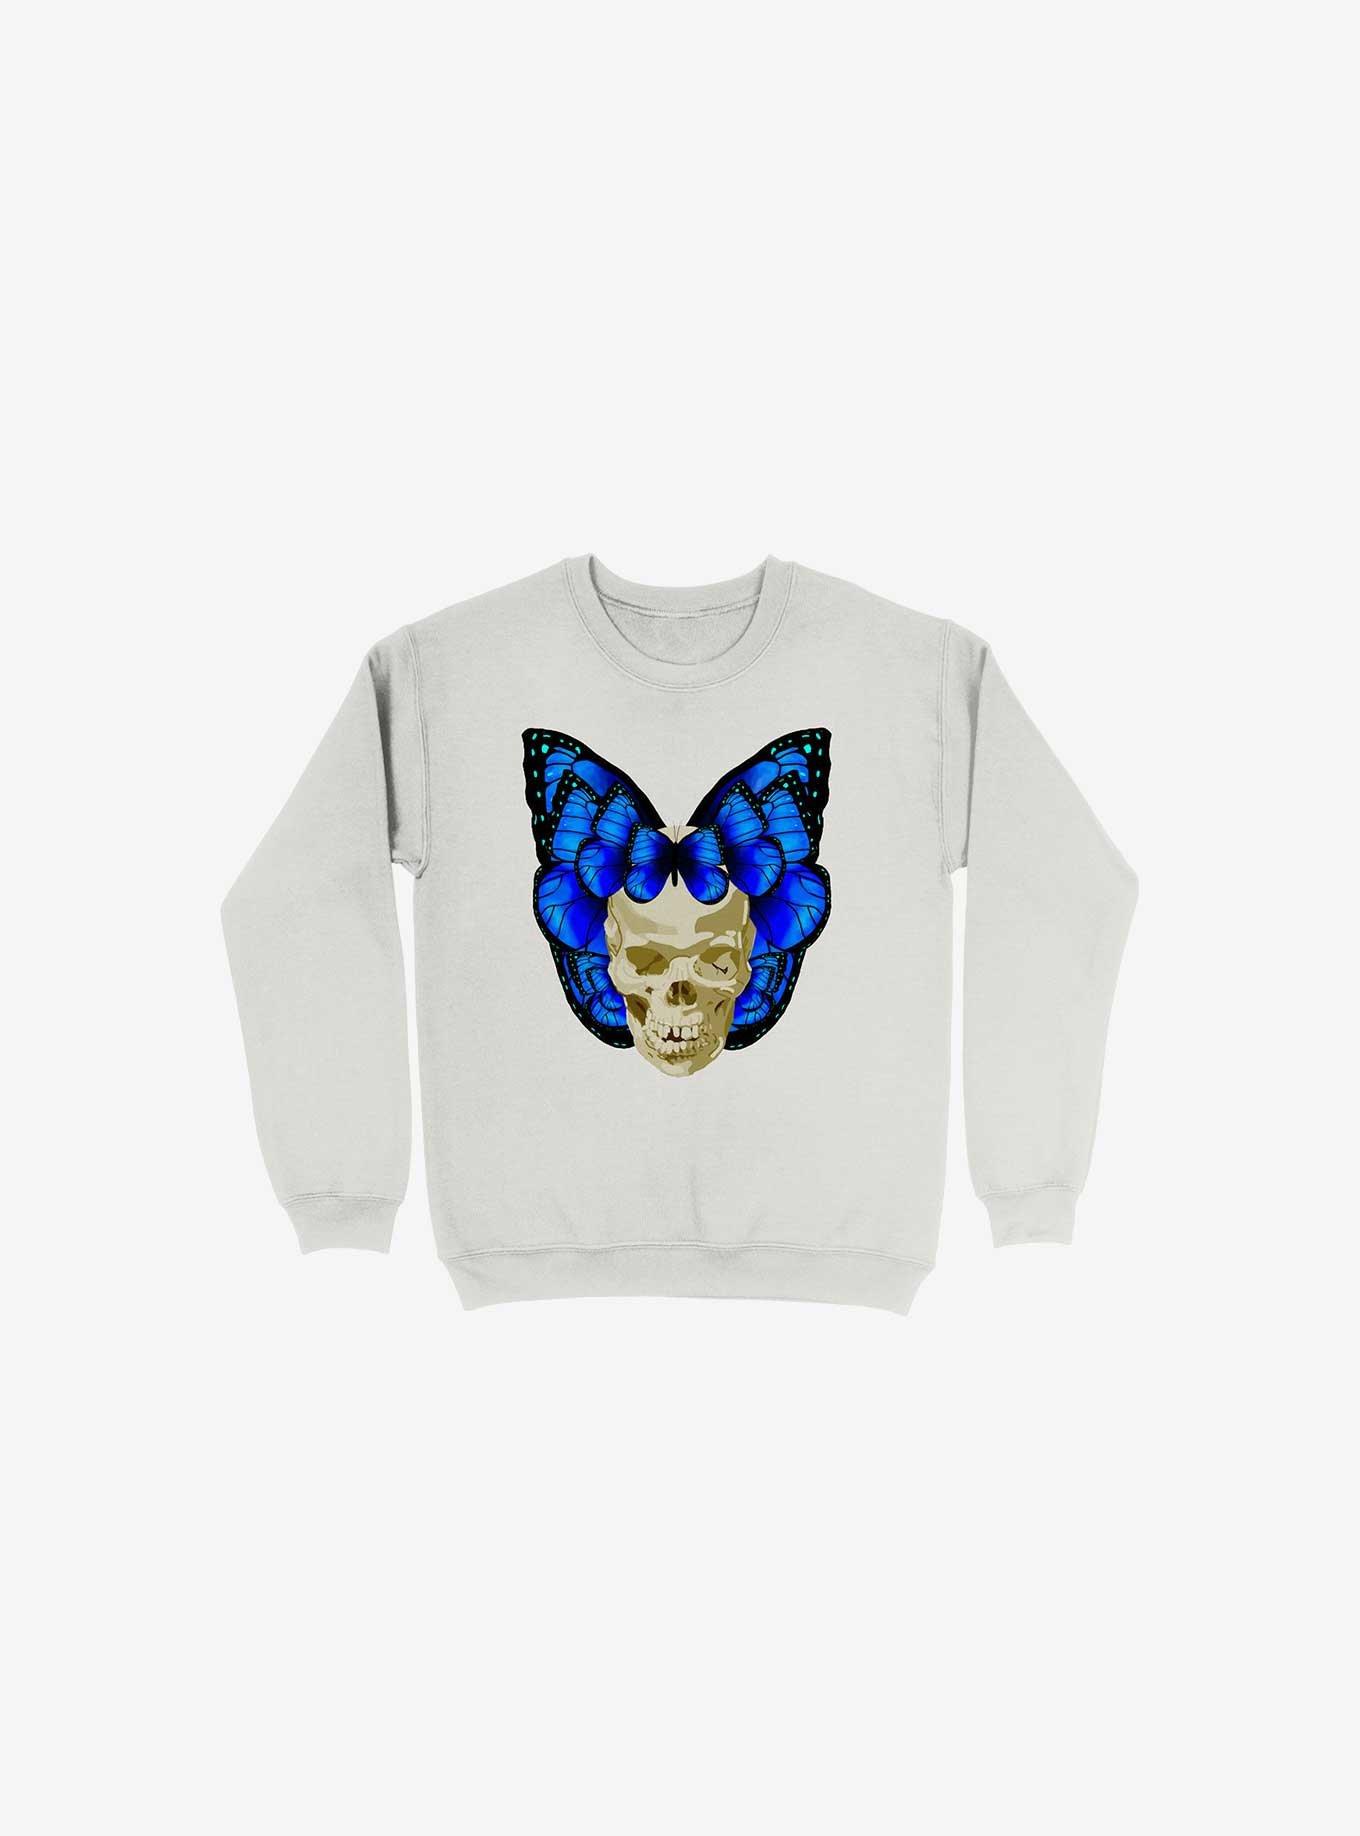 Wings Of Death Butterfly Skull White Sweatshirt, WHITE, hi-res